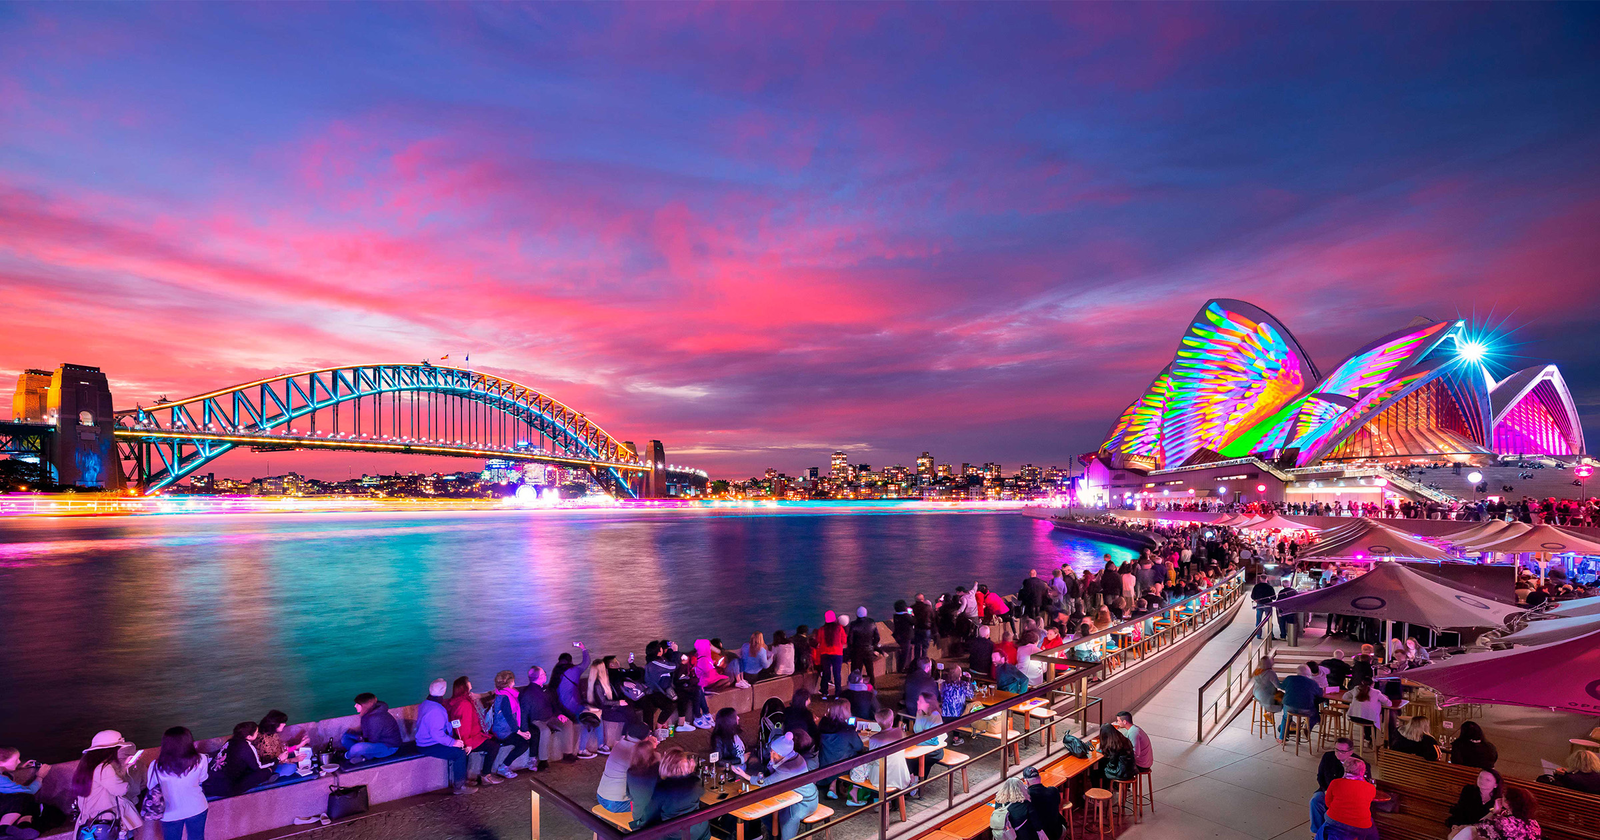 Sydney Harbour Bridge and Opera House lit up for the Vivid Festival in Sydney!